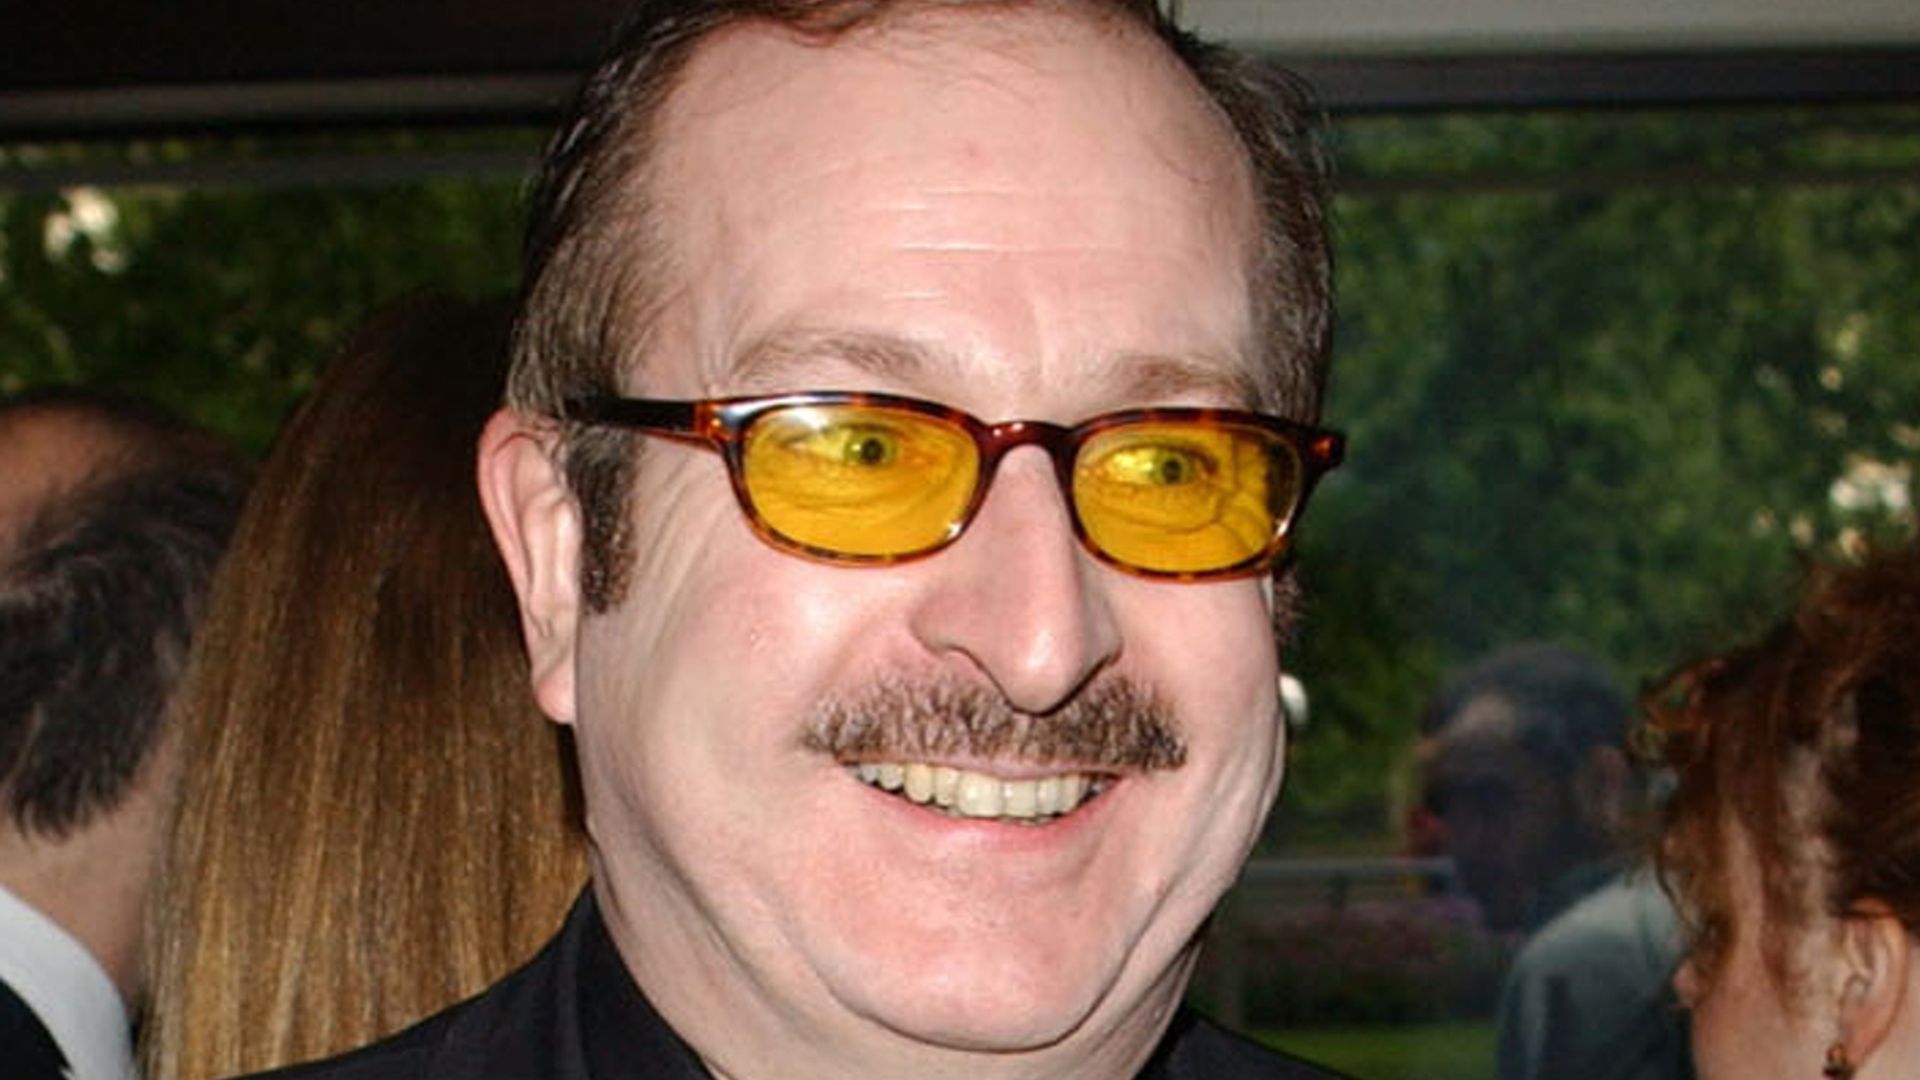 Radio 2 DJ Steve Wright died from ruptured stomach ulcer